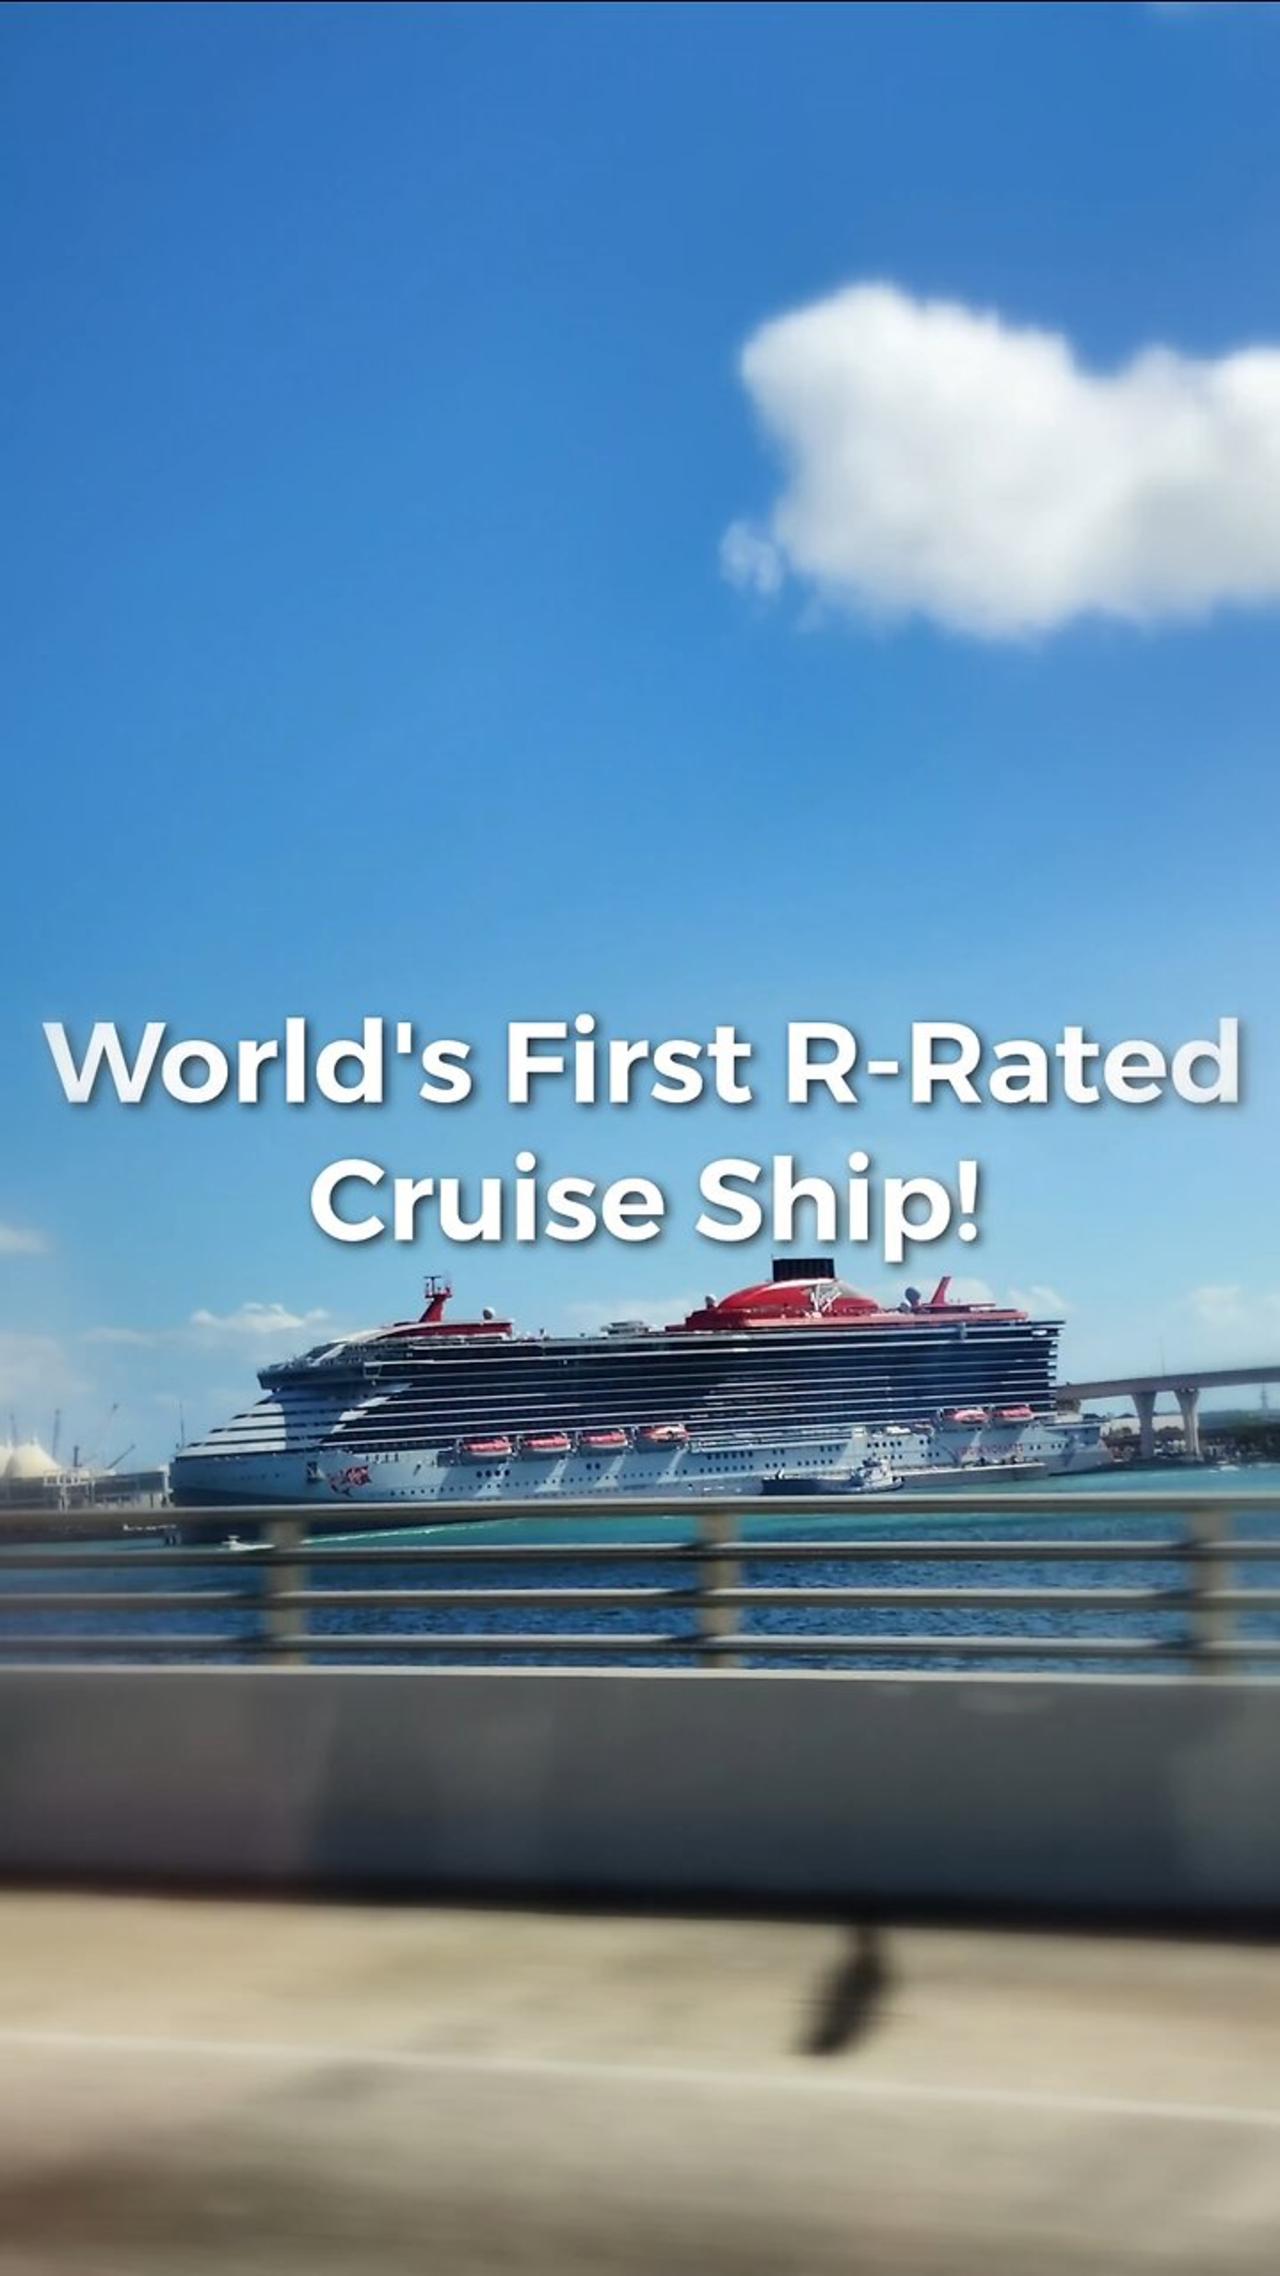 We Spent 4 Nights On Worlds FIRST R-RATED Cruise Ship | Virgin Voyages.    #cruise #shorts